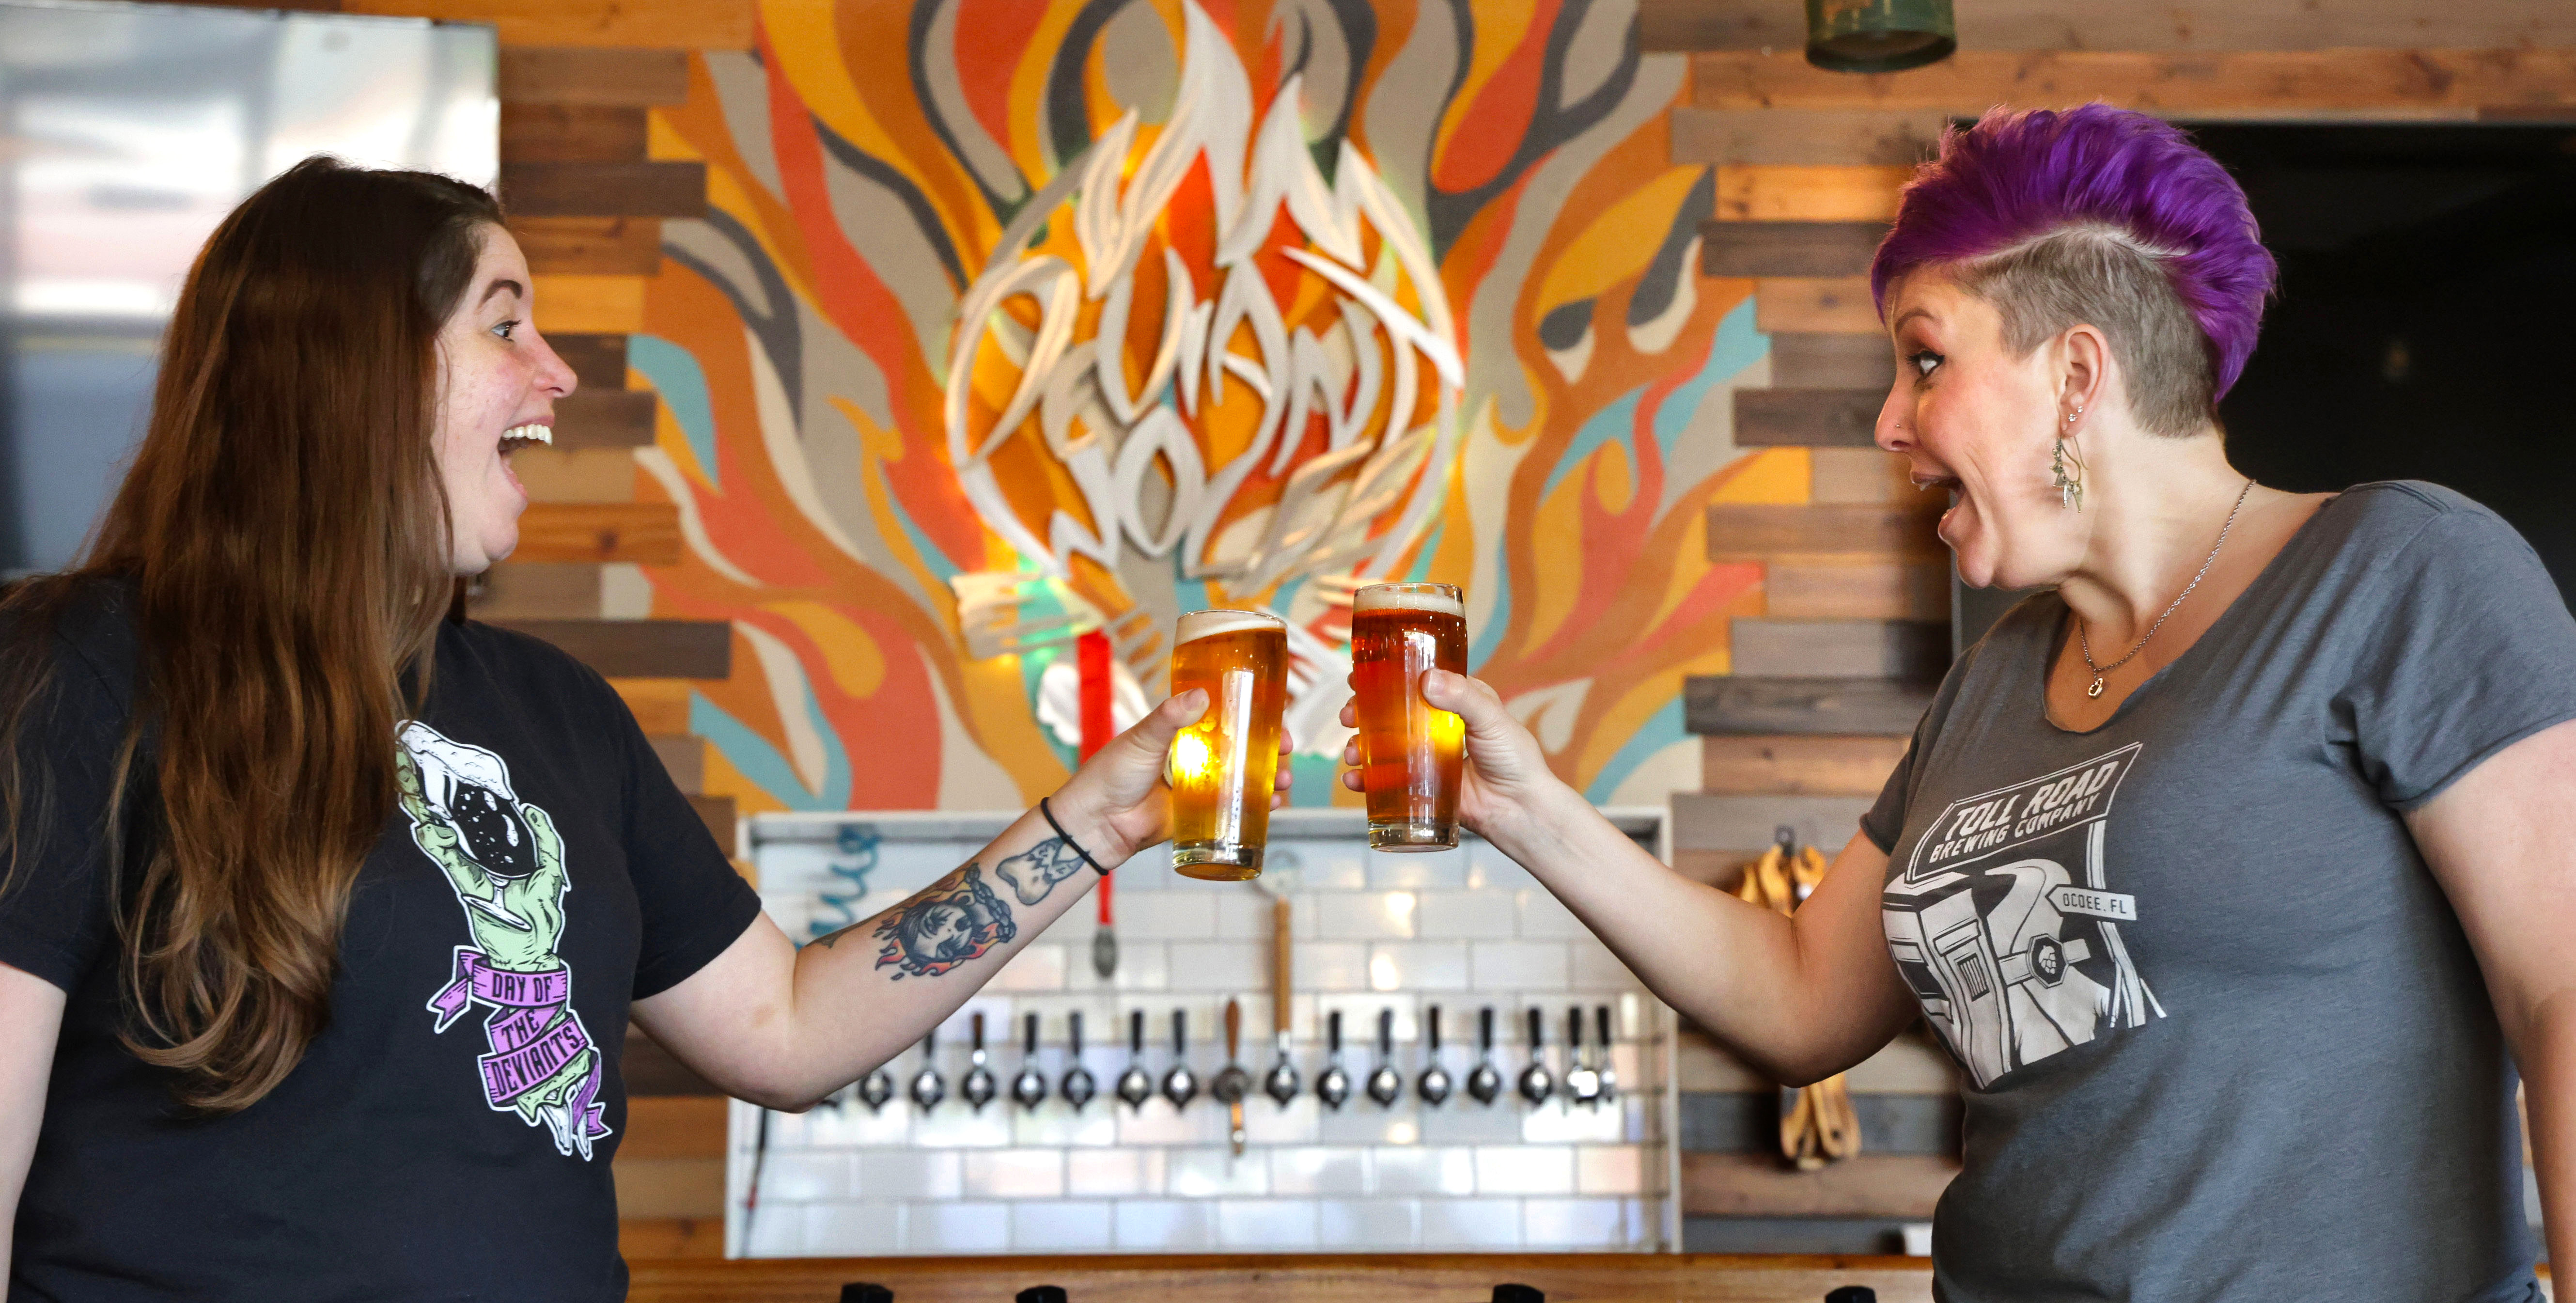 Heather Opheim of Deviant Wolfe Brewing, left, and Amanda Smythe from Tollroad Brewing raise a glass at Deviant Wolfe in downtown Sanford, Thursday, May 21, 2024. (Joe Burbank/Orlando Sentinel)